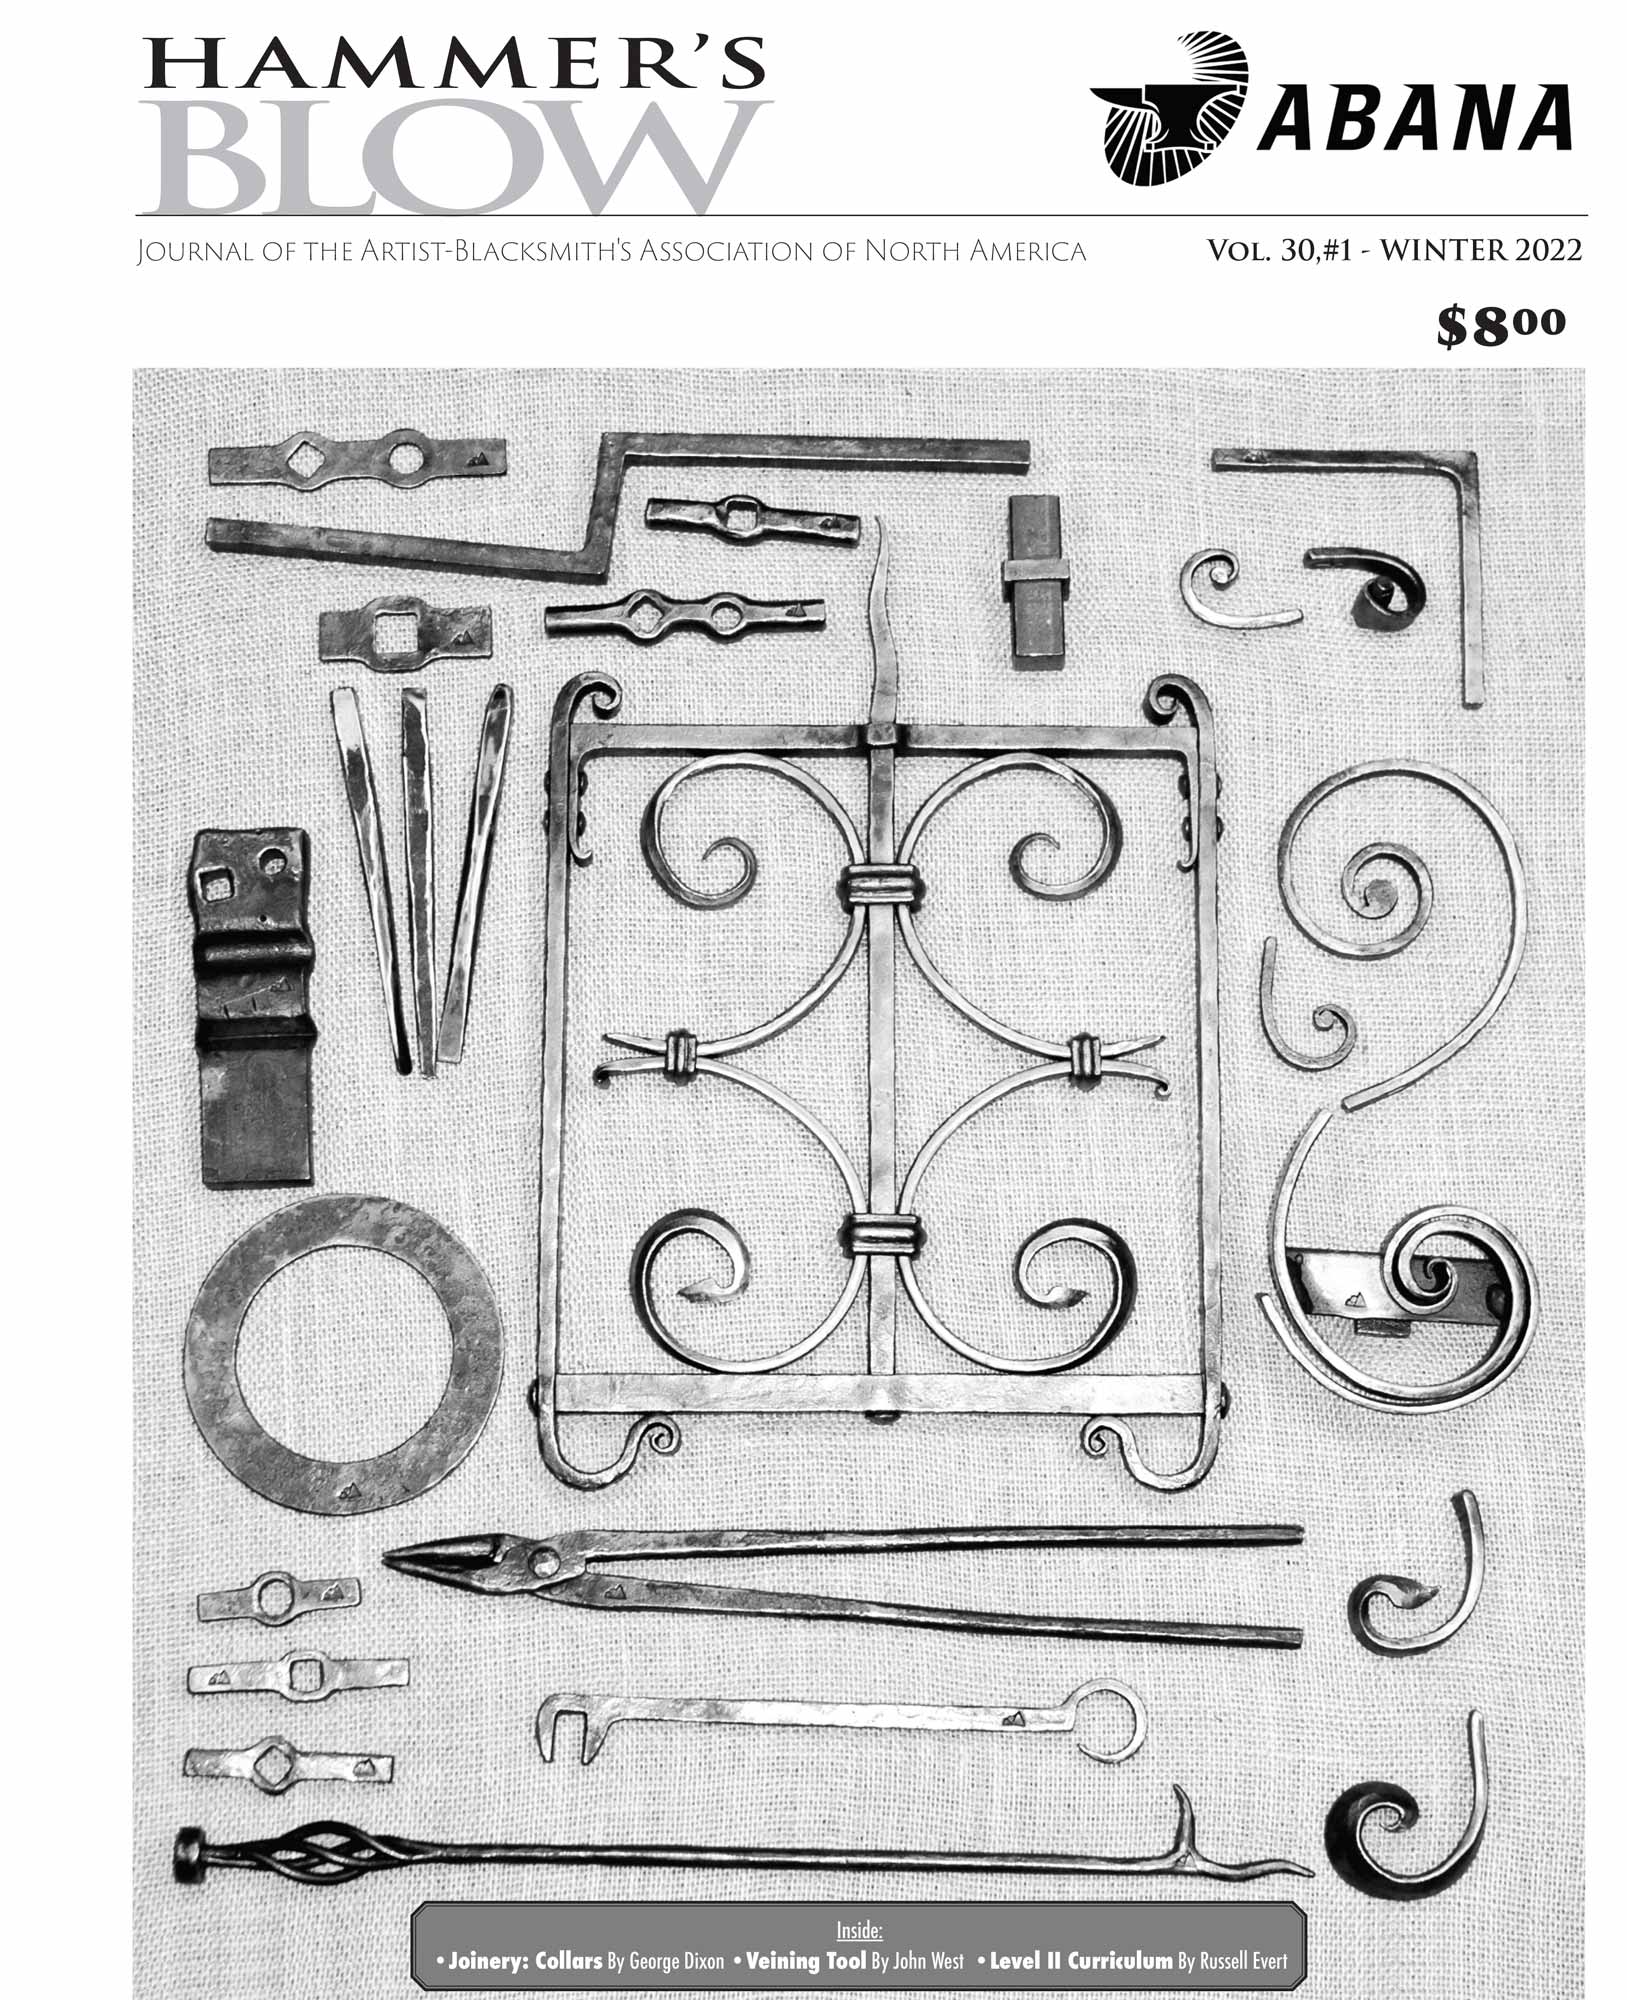 Cover image of the Winter 2022 issue of Hammer's Blow, a how-to journal from the Artist-Blacksmith's Association of North America.